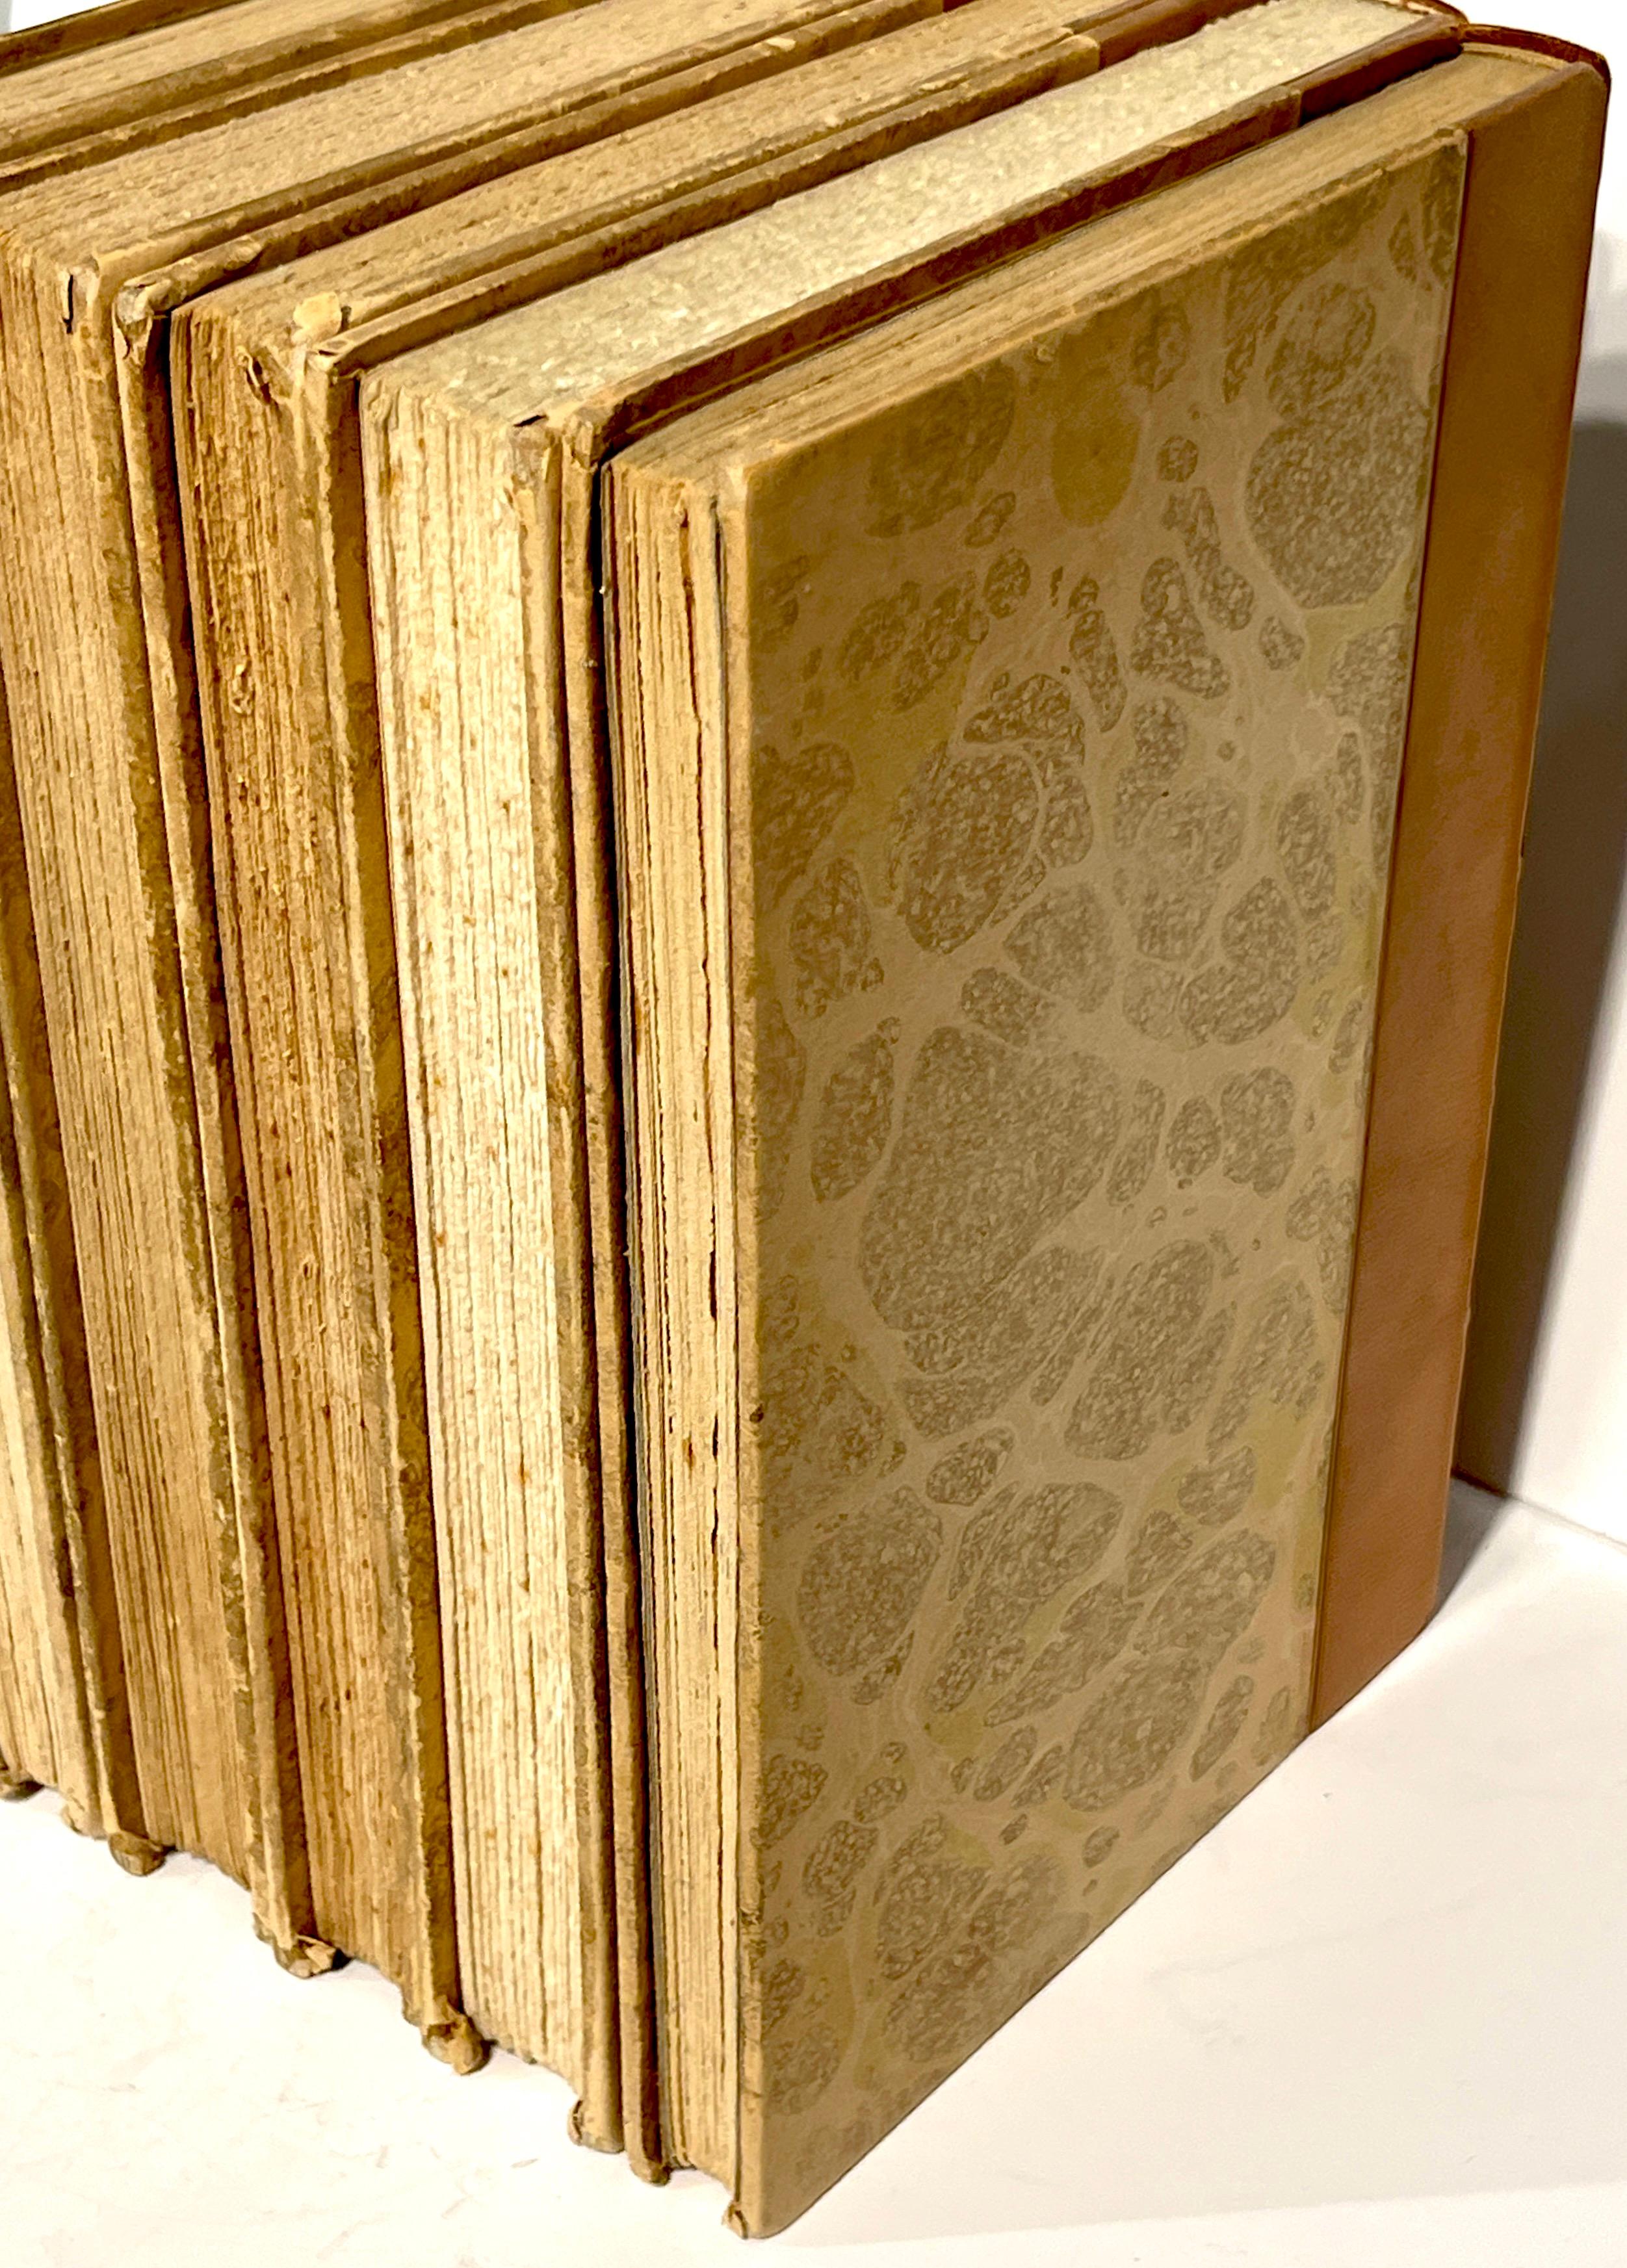 5 Antique Saddle Leather & Gilt Steel Grey Bound Gilt Theatrical Books in Greek For Sale 8